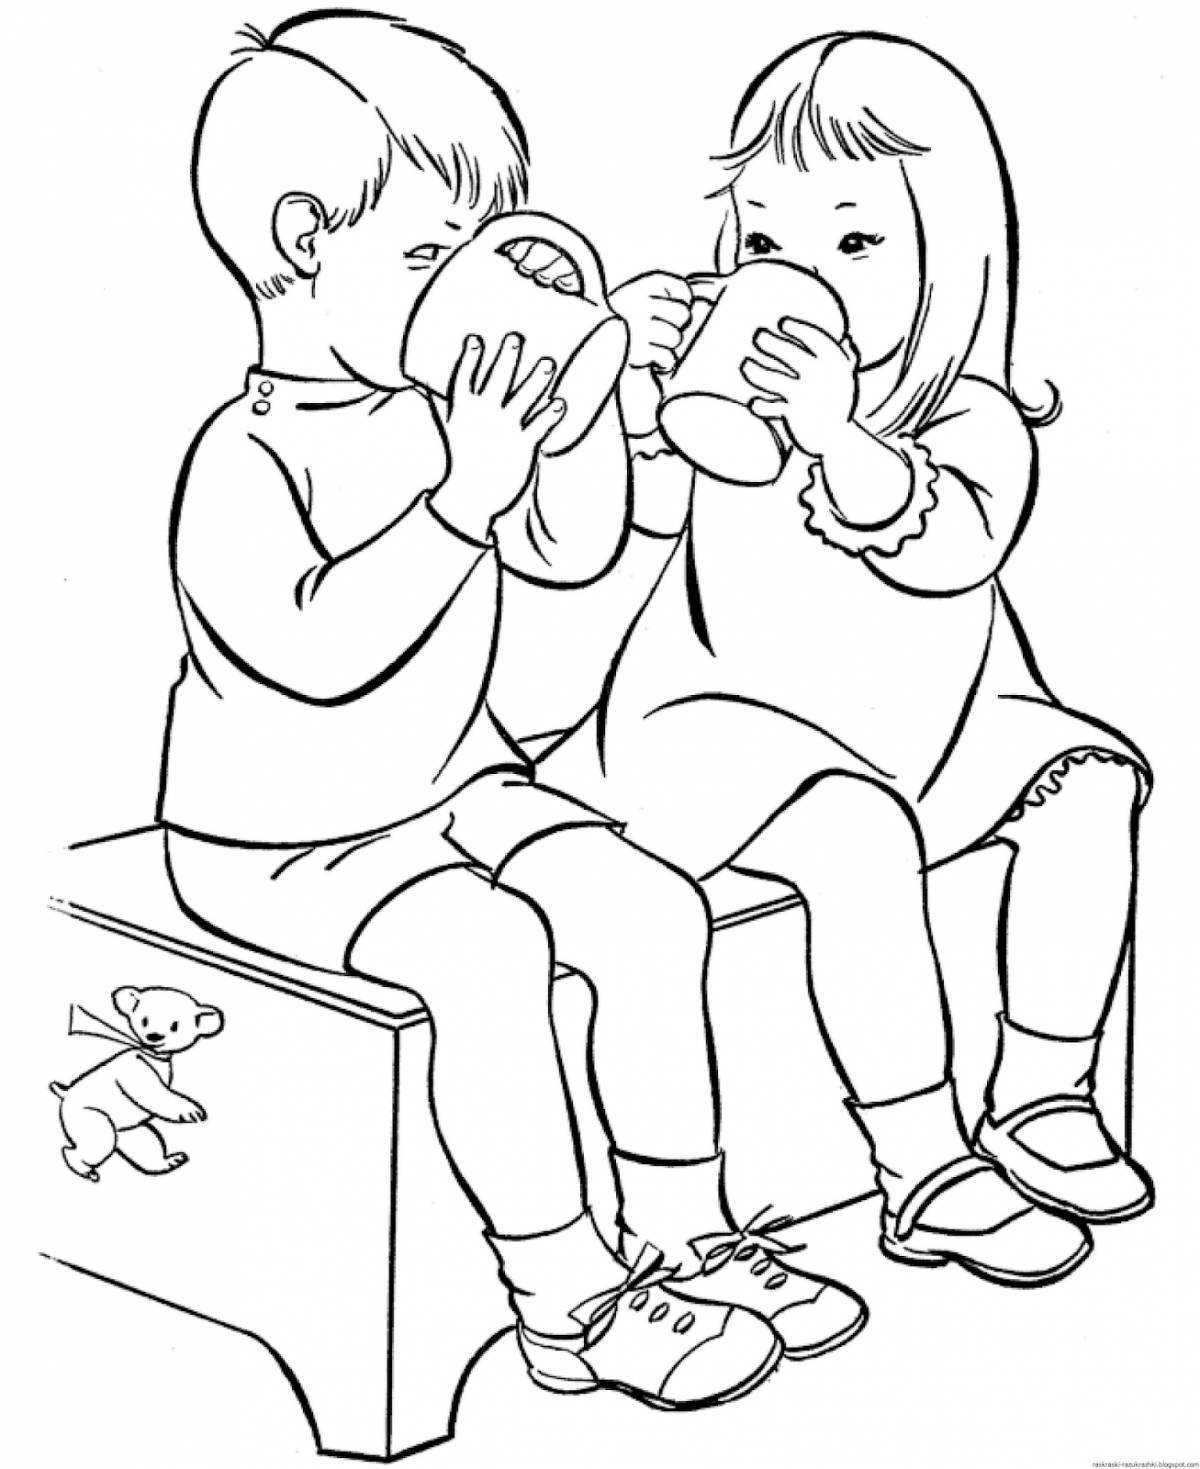 Glowing friendship coloring page